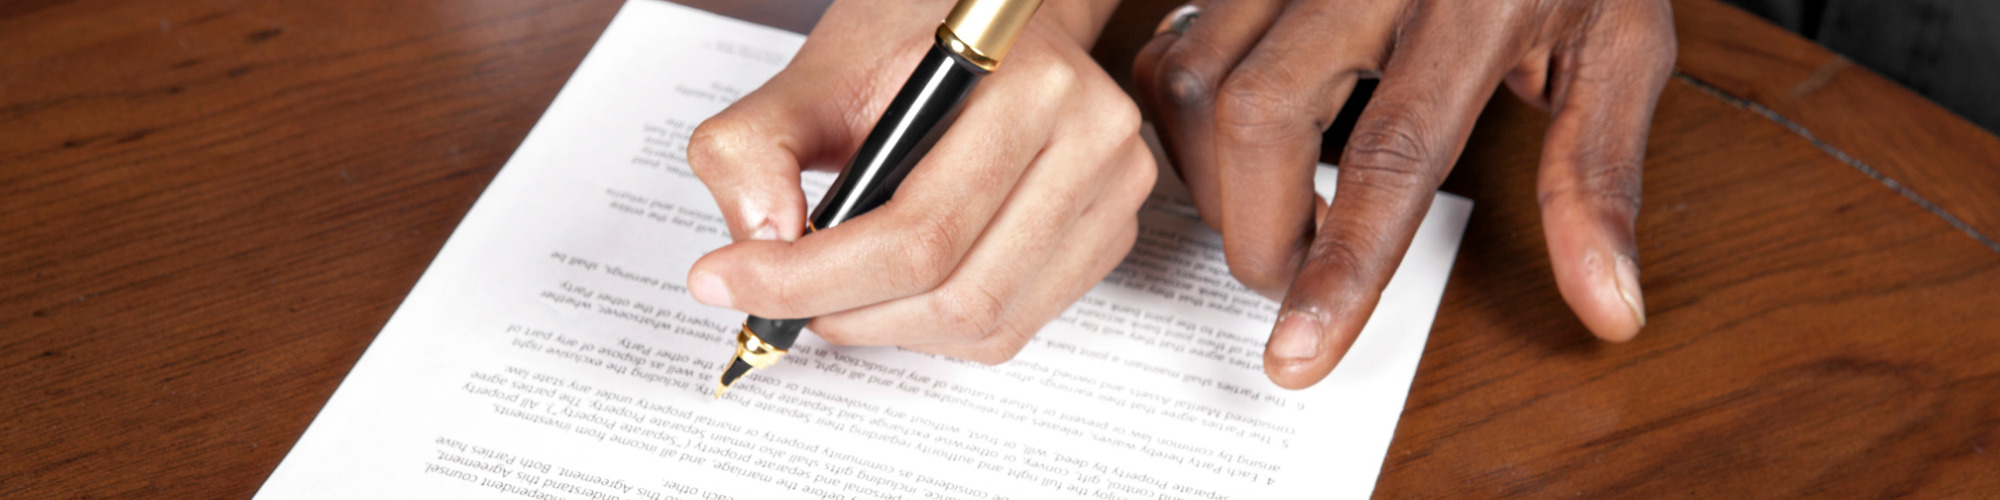 An Introduction to Nuptial Agreements - Draft & Advise with Confidence    